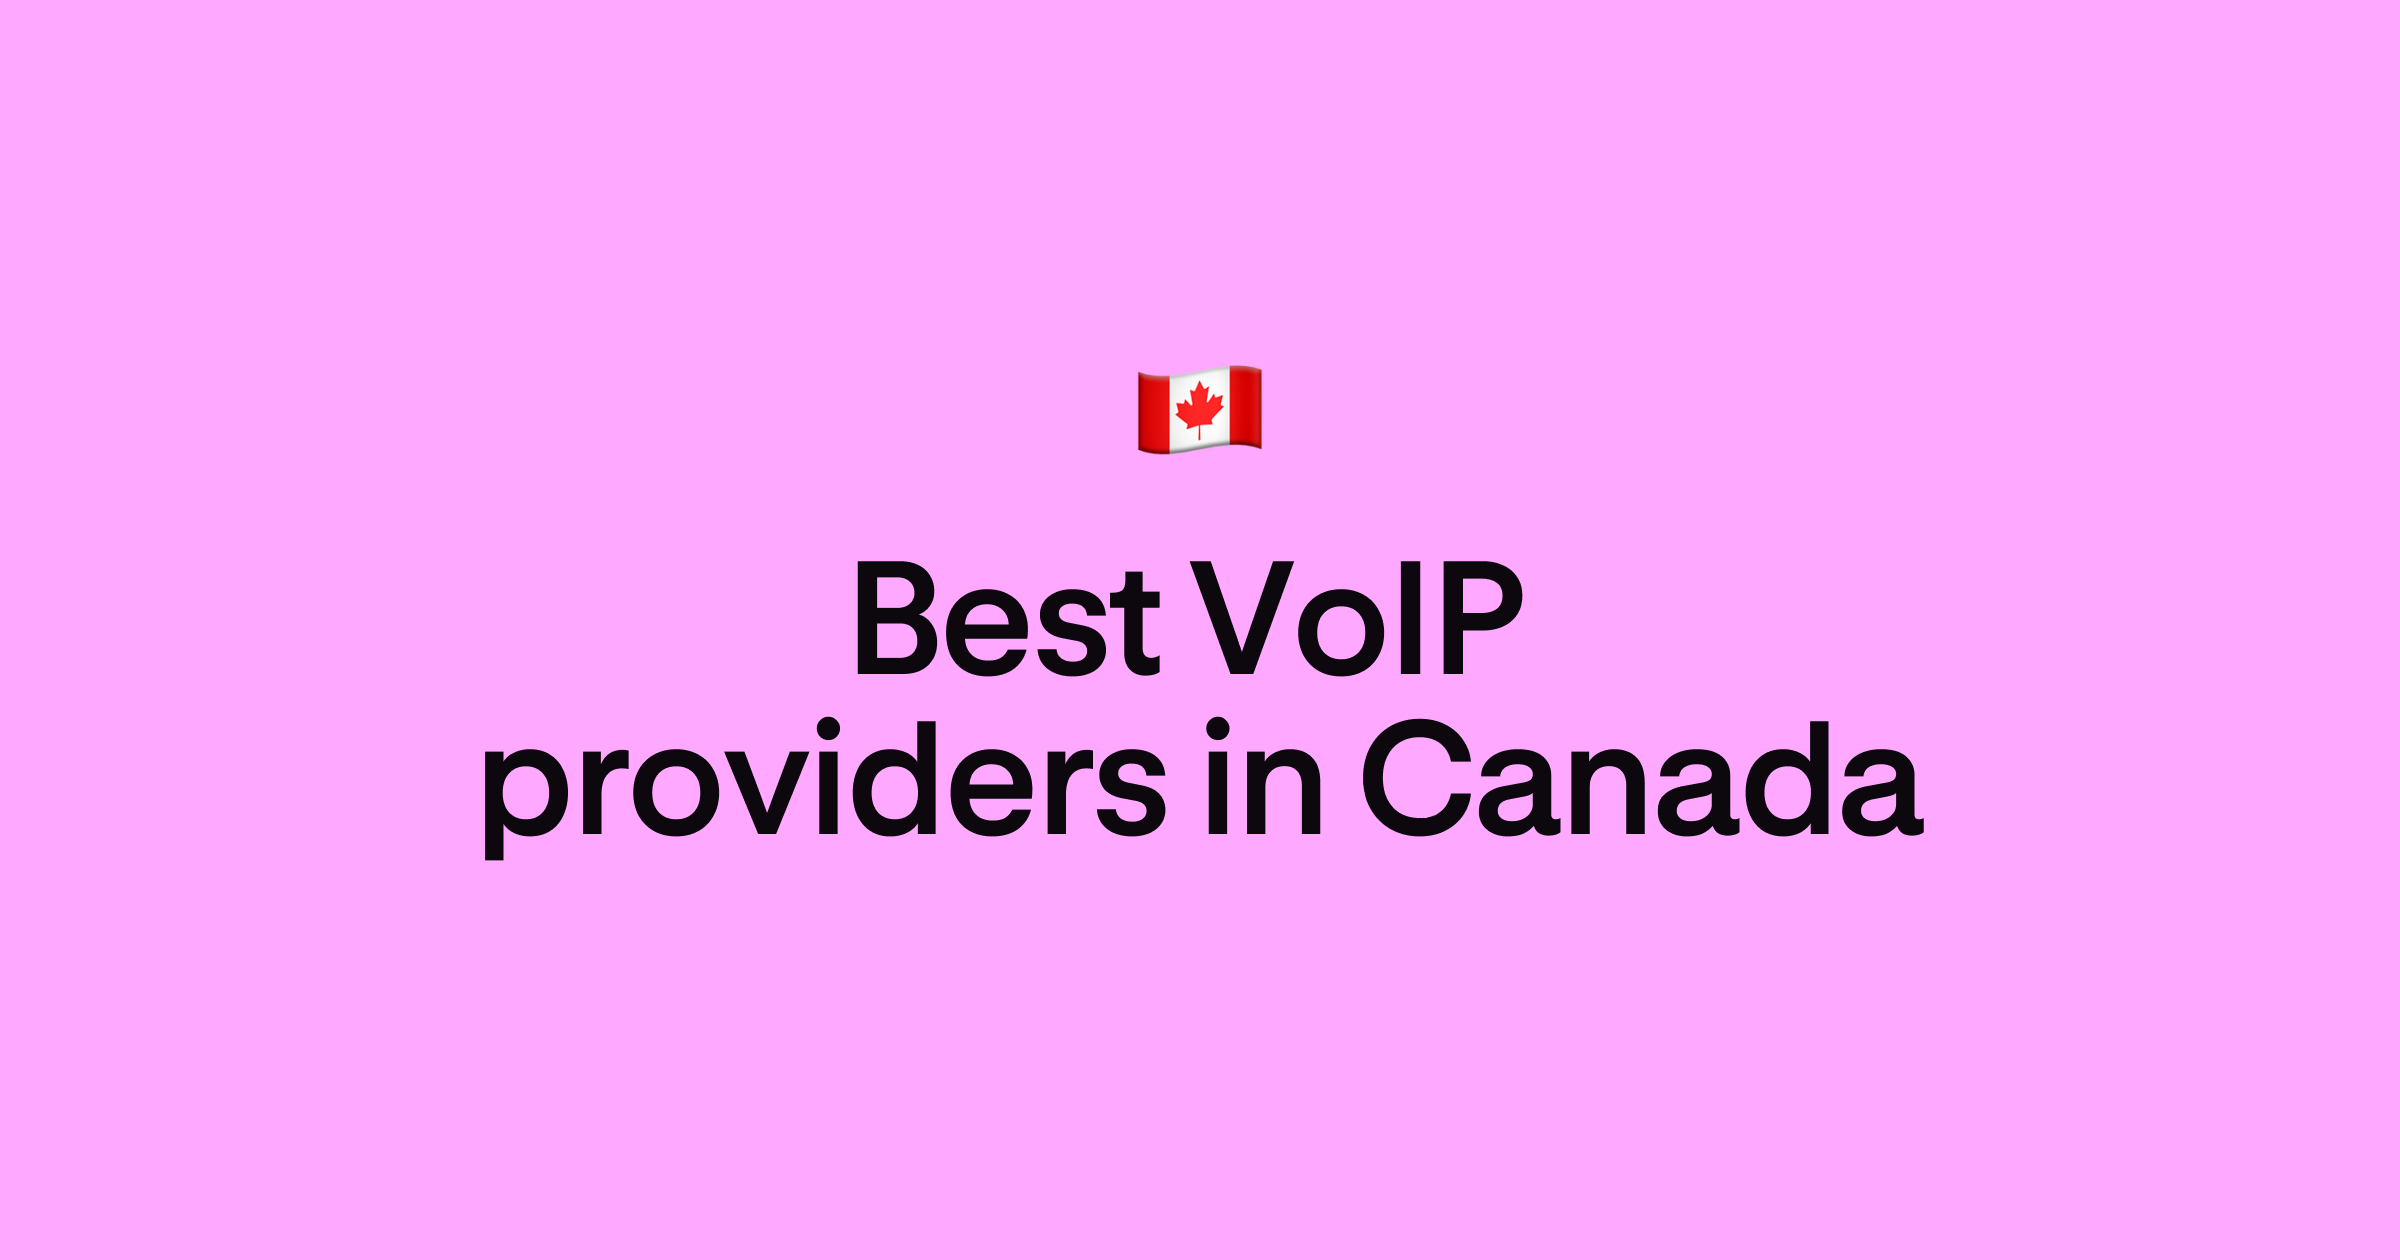 Canadian VoIP providers